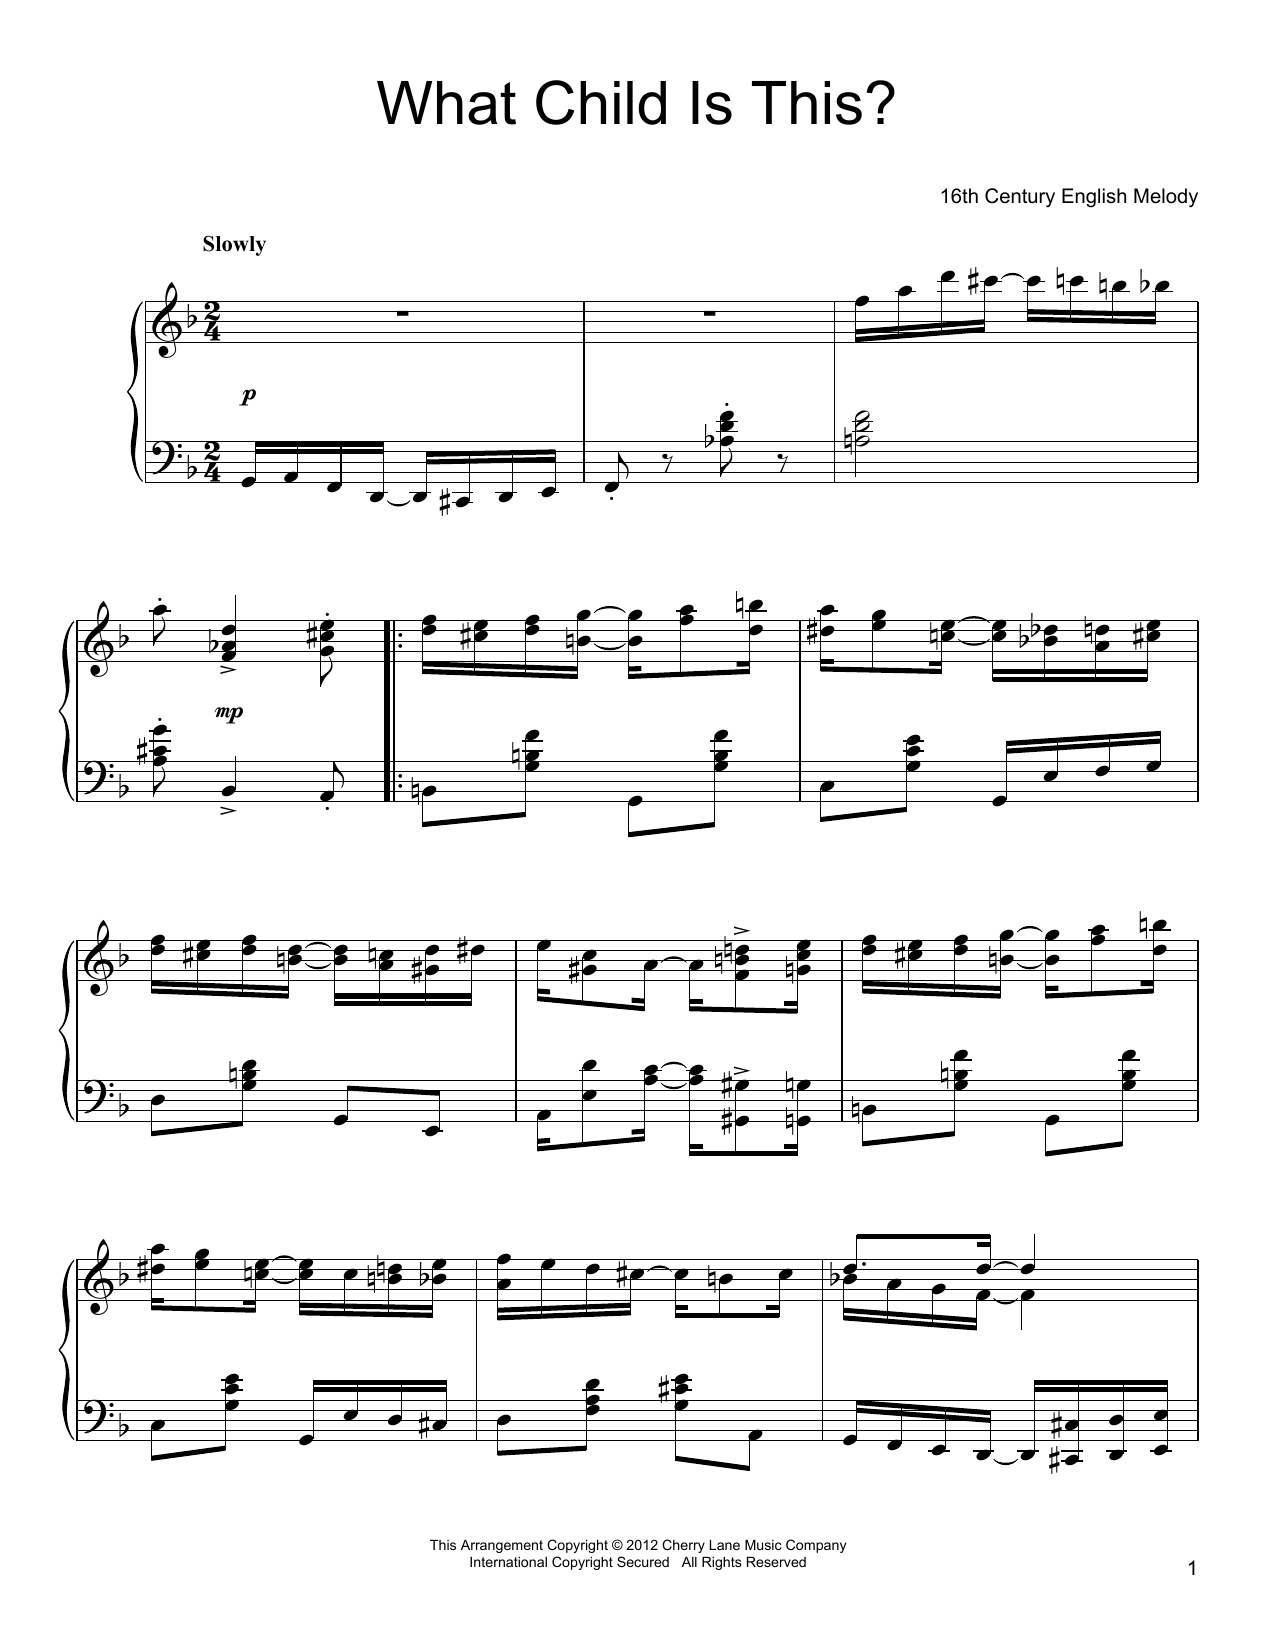 Christmas Carol What Child Is This? sheet music notes and chords. Download Printable PDF.